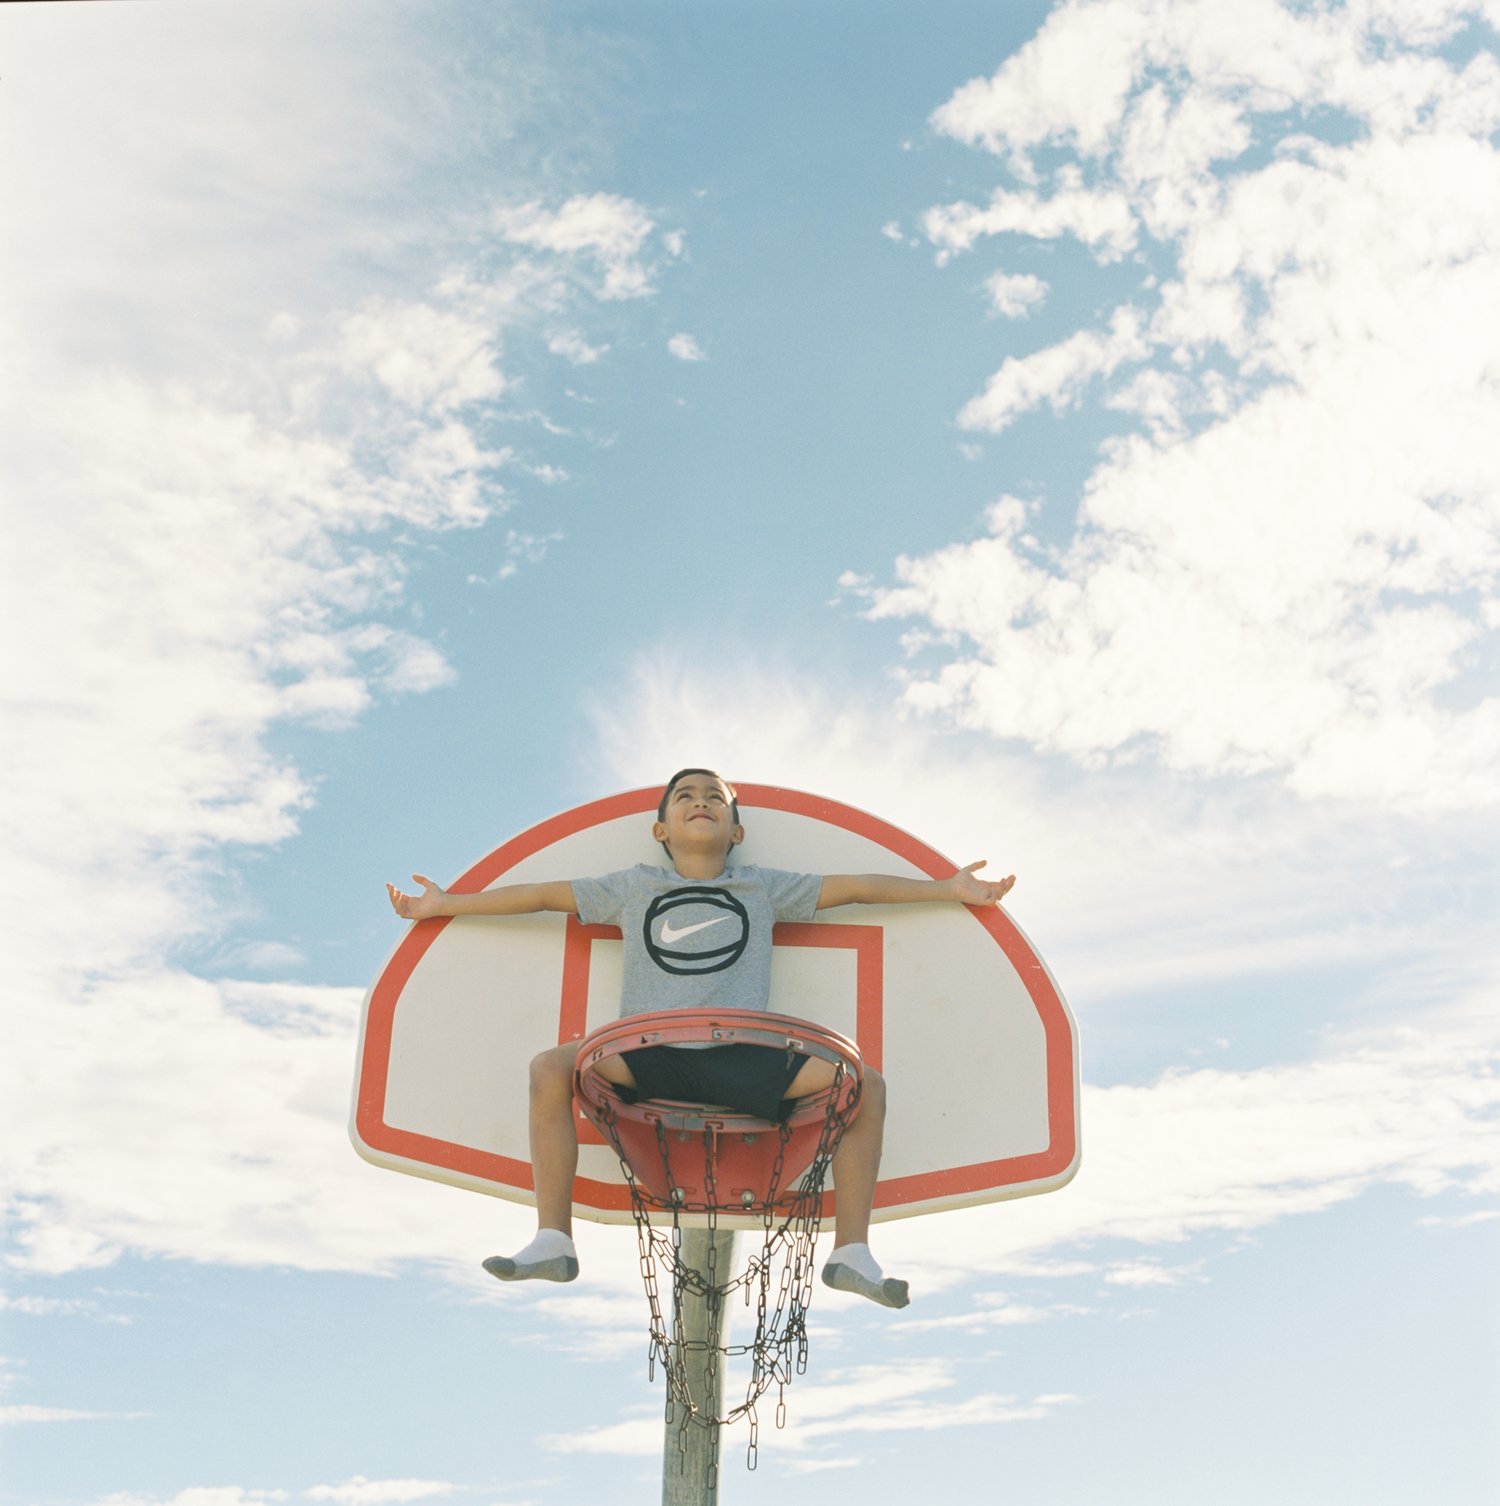 Sebastian sits on the basket in the sky. Dallas, TX 2017. Shot on a Hasselblad 501cm with Fuji Pro 400h film.&nbsp;